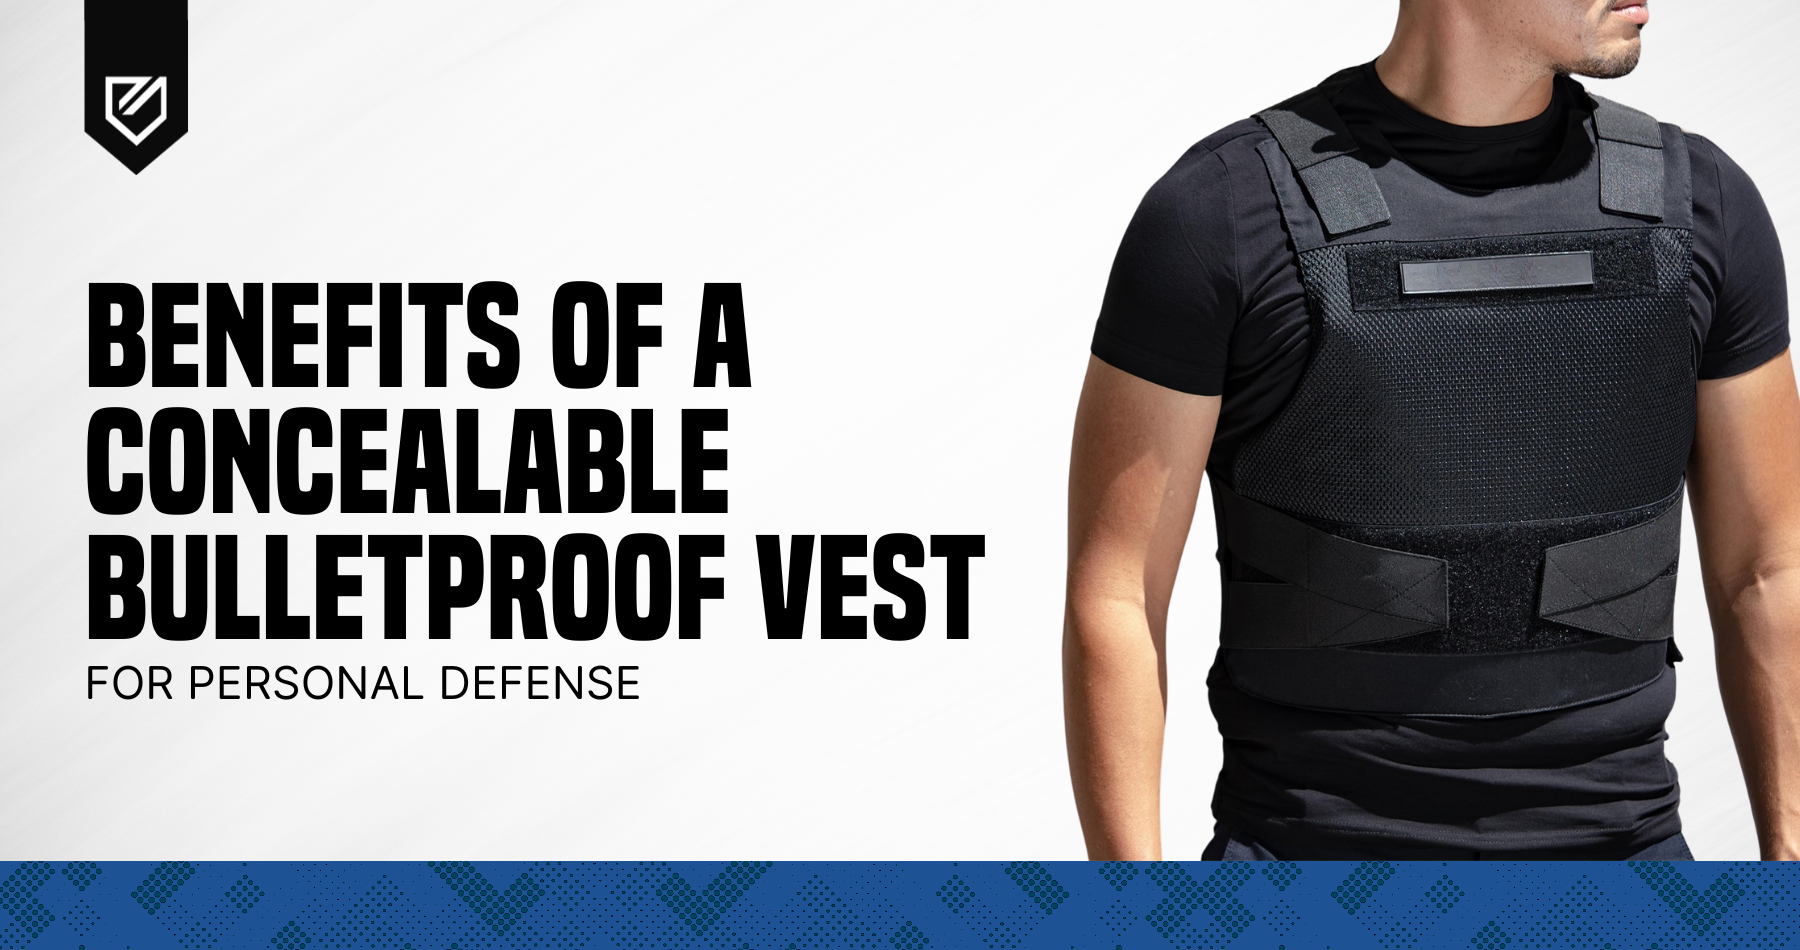 Benefits of a Concealable Bulletproof Vest for Personal Defense